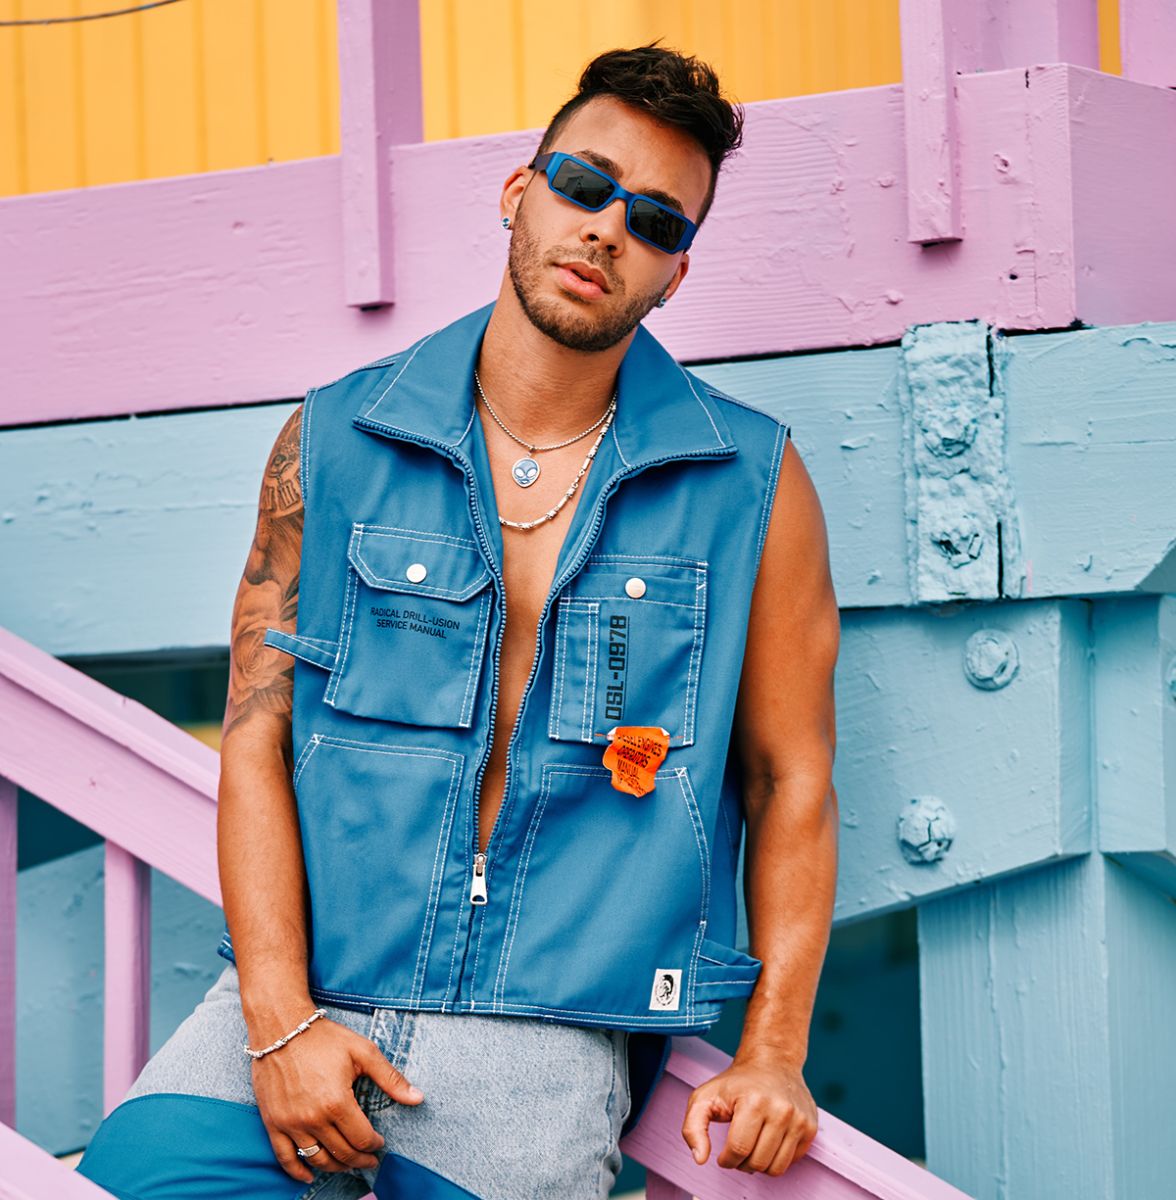 Prince Royce celebrates the departure of ‘Lao a Lao’, and his 5 nominations for Latin Billobard Awards